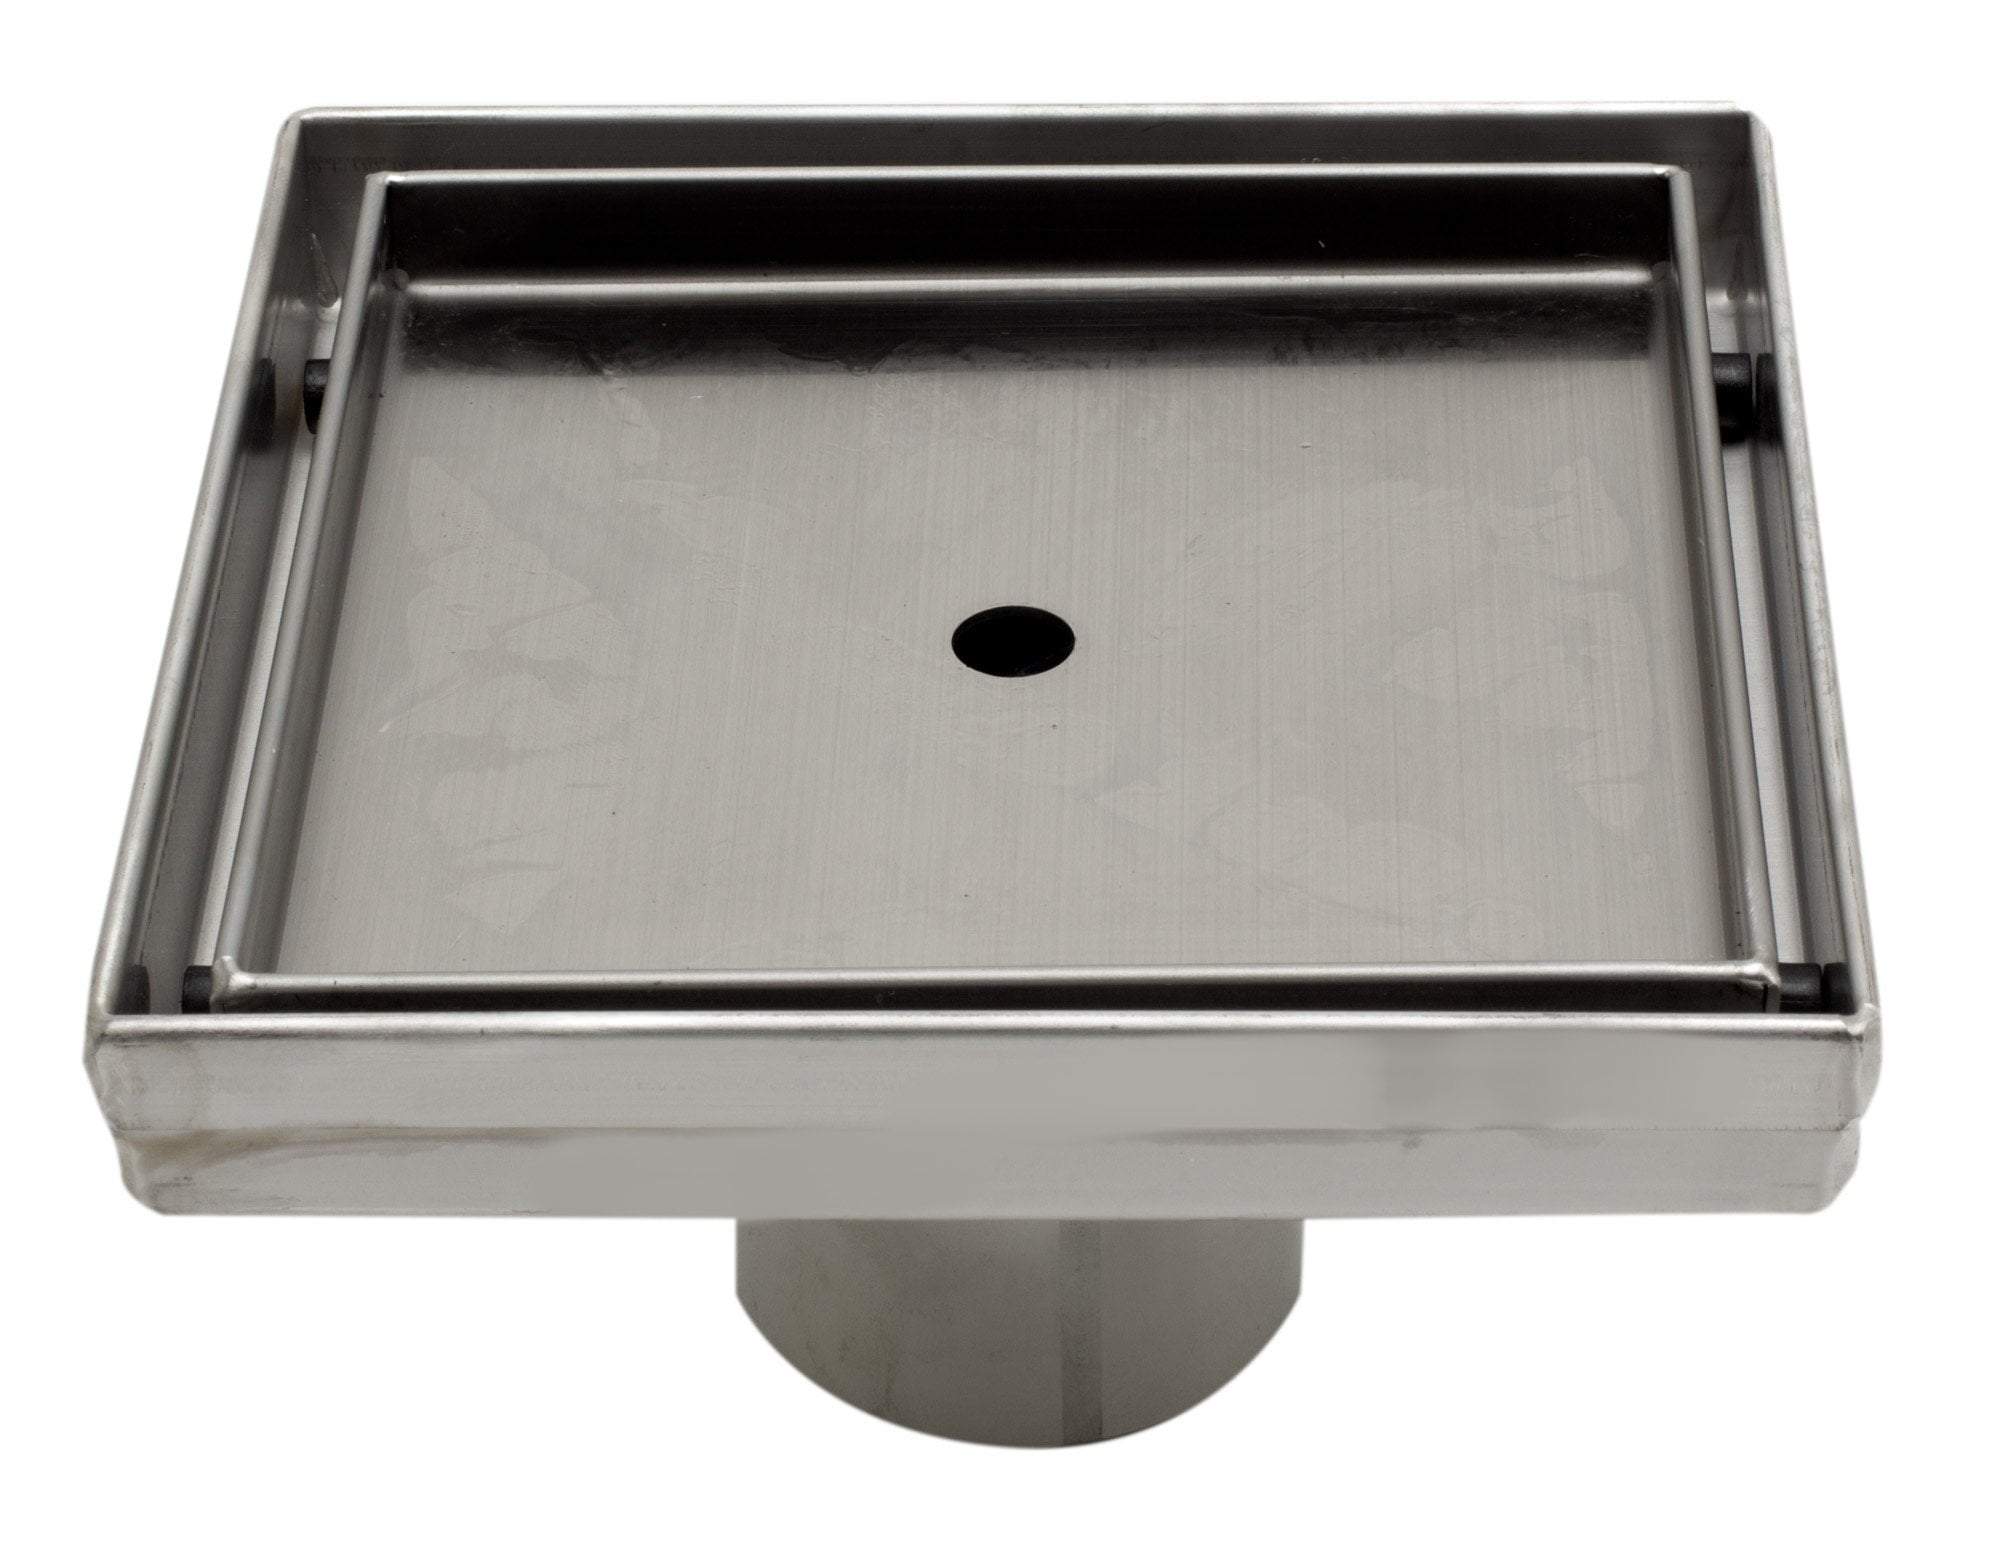 5" x 5" Modern Square Stainless Steel Shower Drain w/o Cover